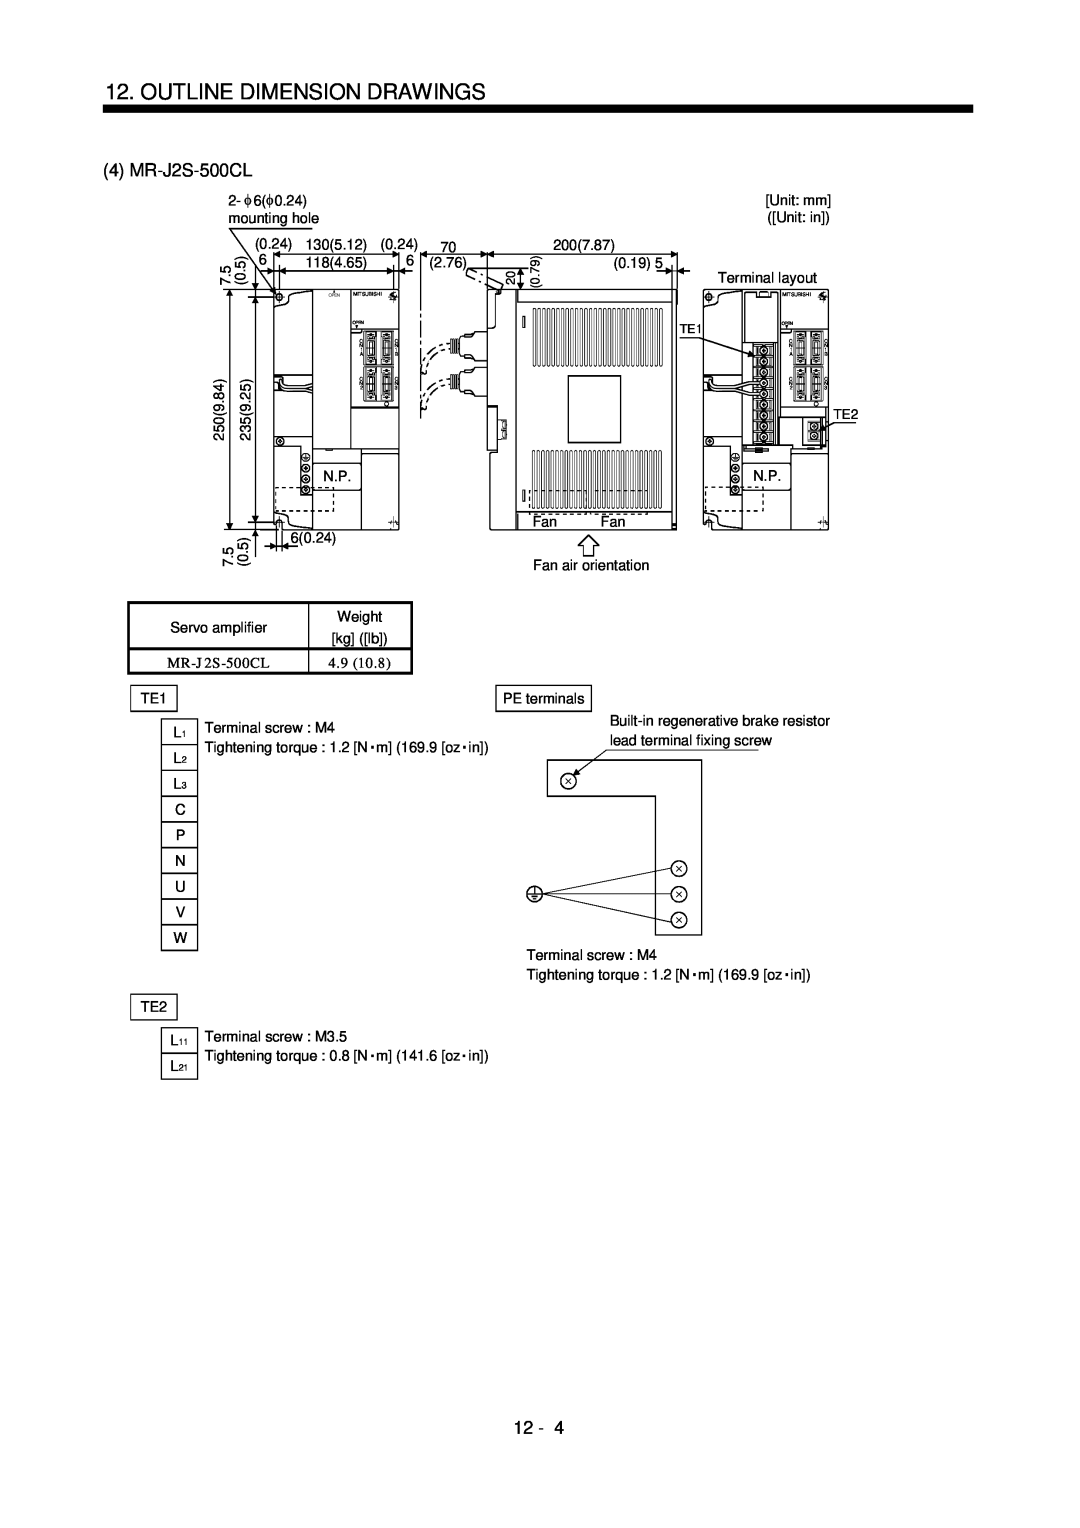 Mitsubishi Electronics MR-J2S- CL specifications MR-J2S-500CL, Outline Dimension Drawings, 12 